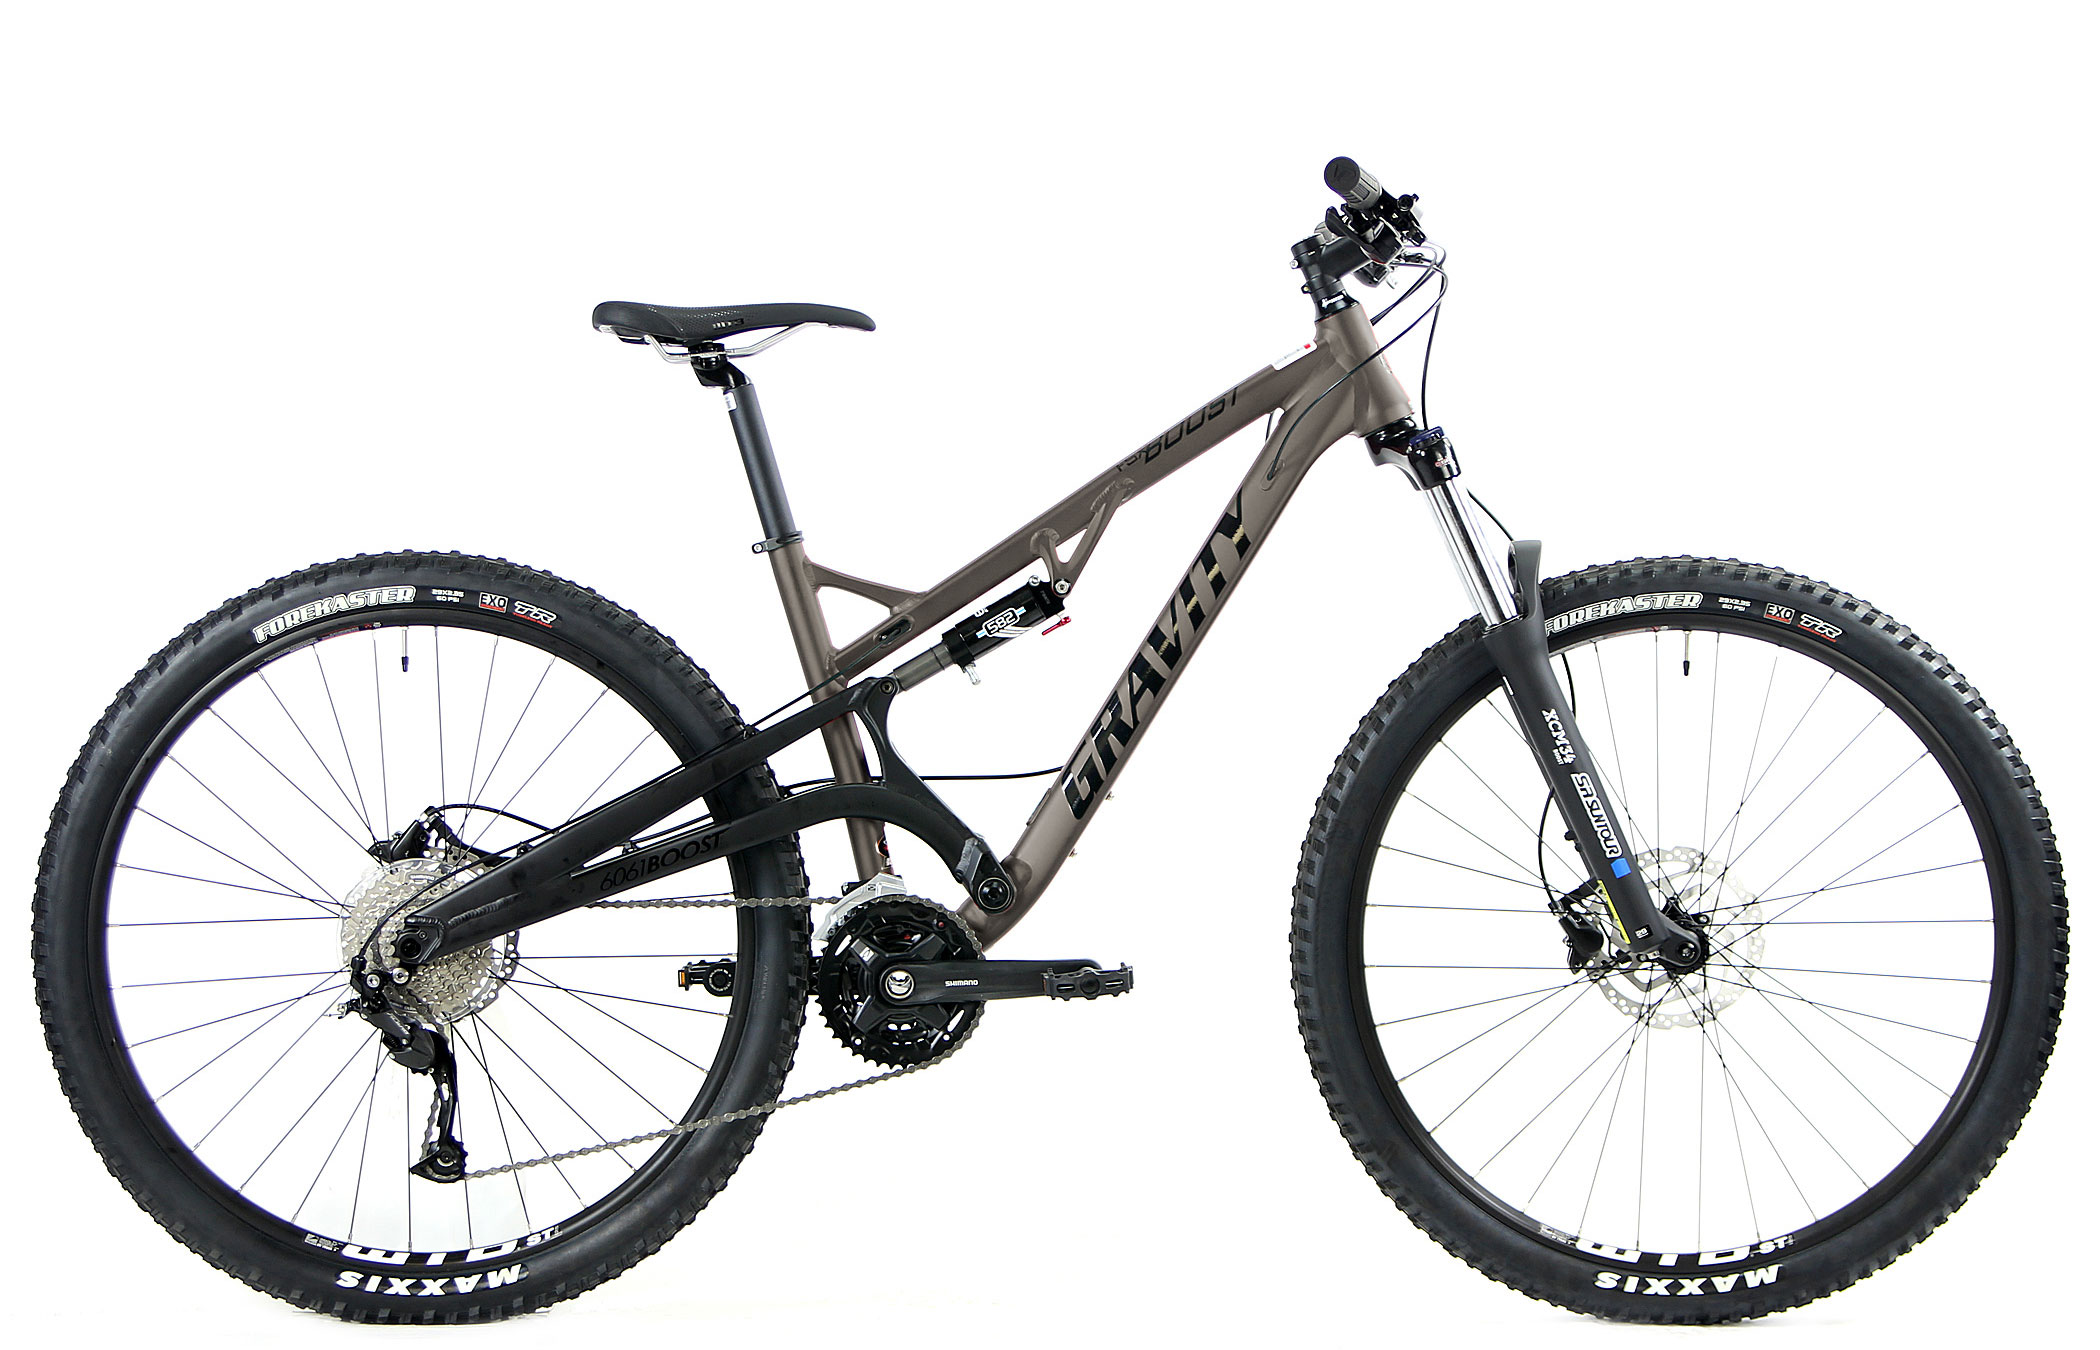 cliënt In het algemeen vallei Save up to 60% off new 27PLUS CAPABLE and 27.5/29er Mountain Bikes - MTB -  Gravity Full Suspension new 27PLUS CAPABLE and 27.5/29er Mountain Bikes